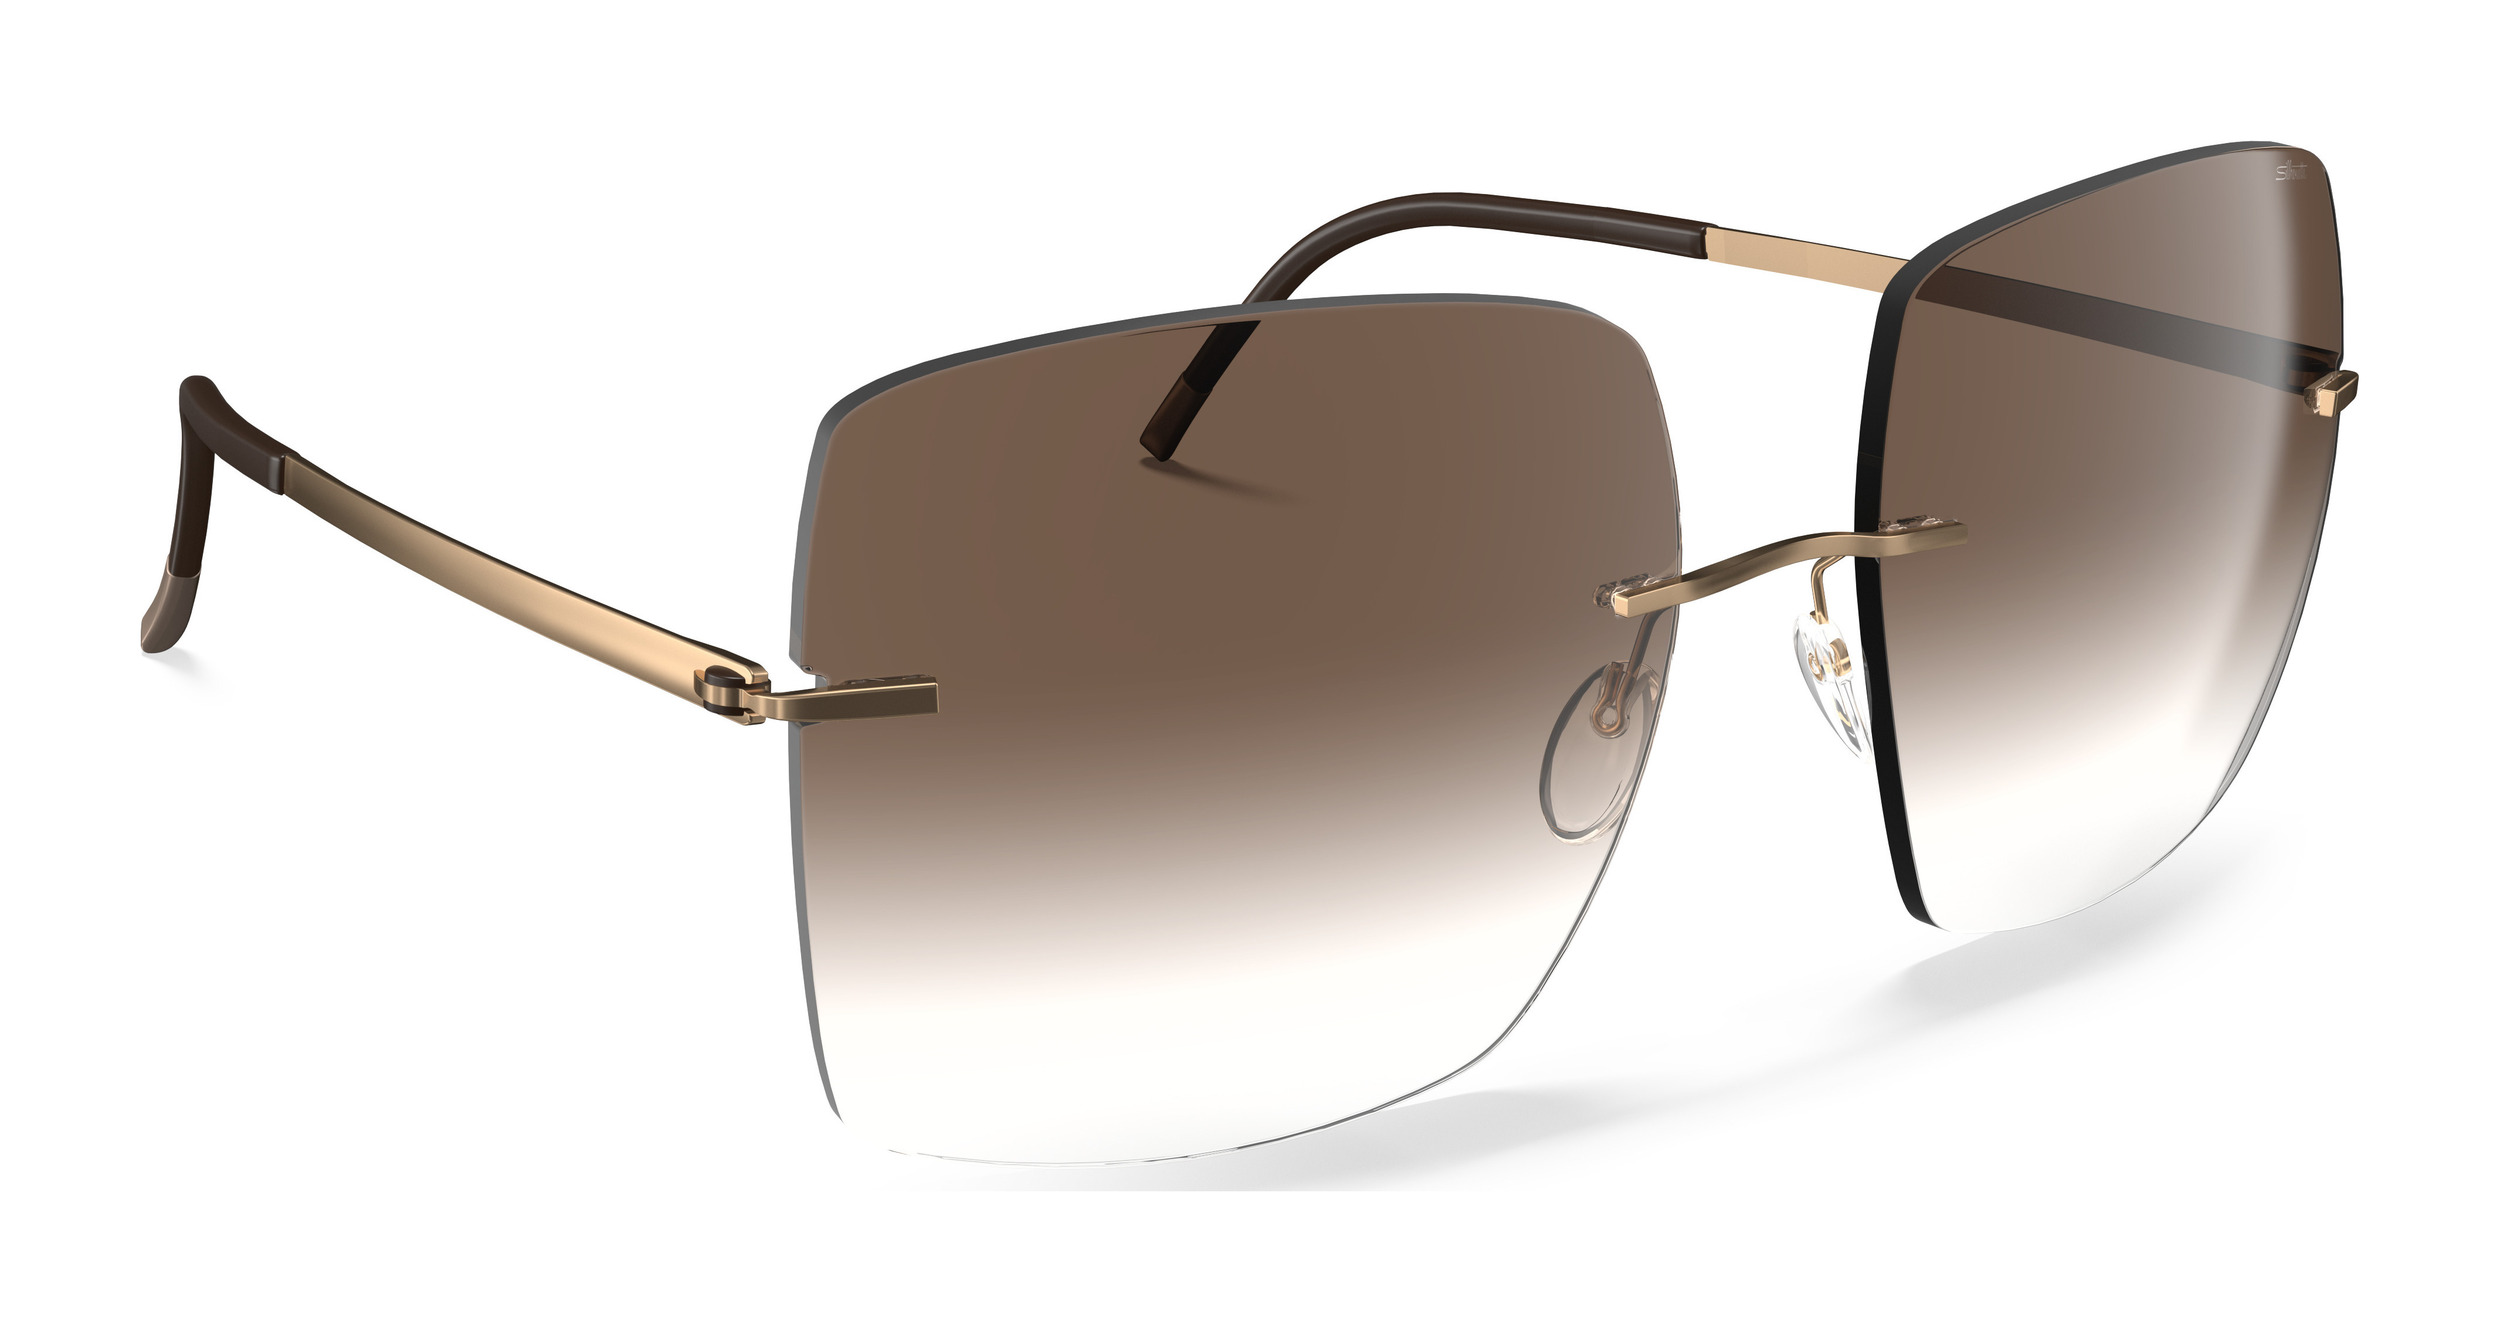 silhouette_cadaques_8191_rimless_shades_classic_brown_gradient